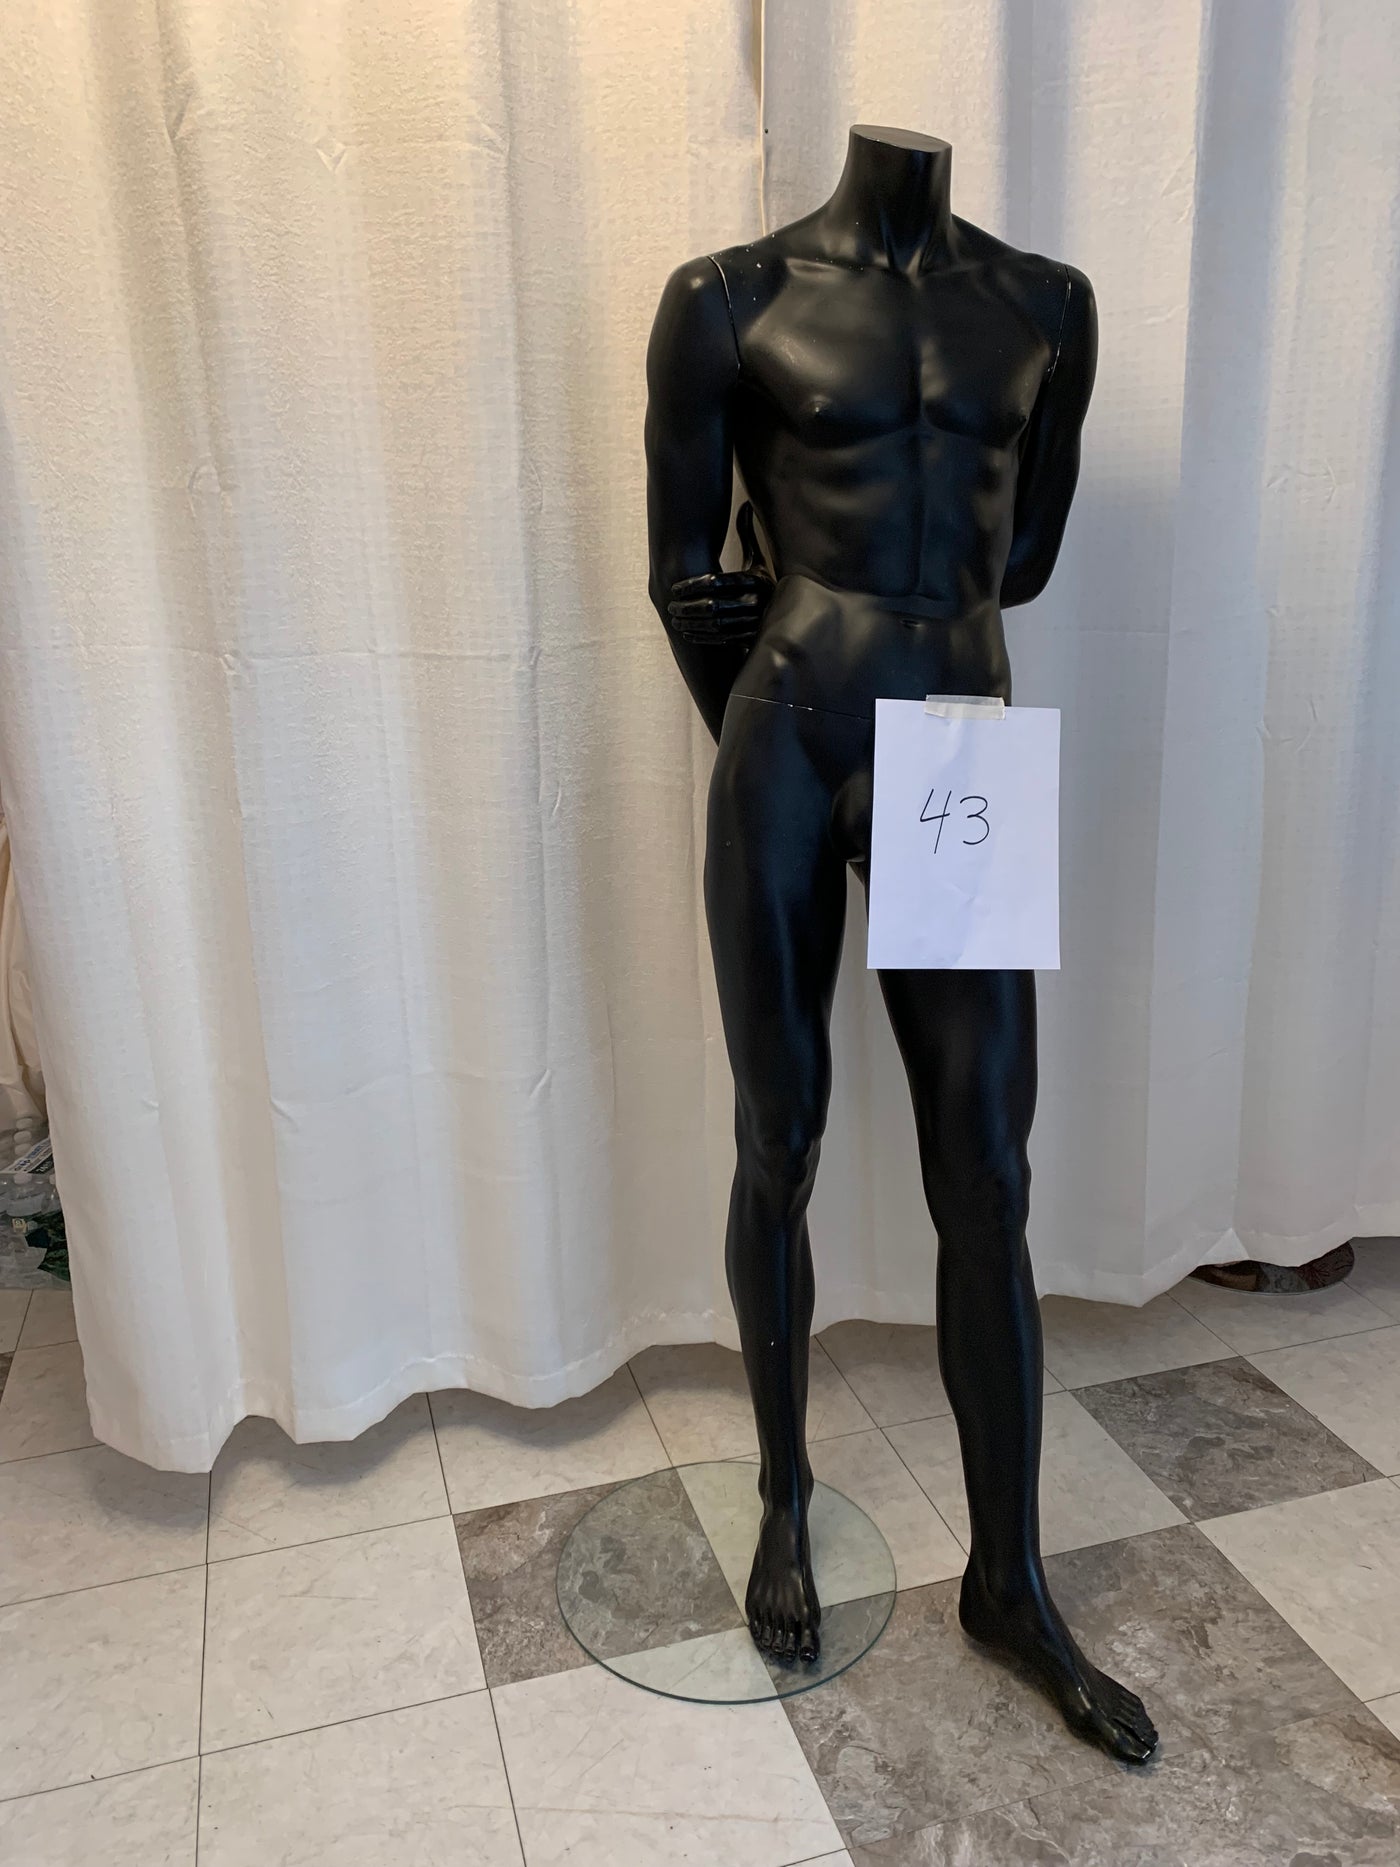 Used Male Headless Mannequin by John Nissan